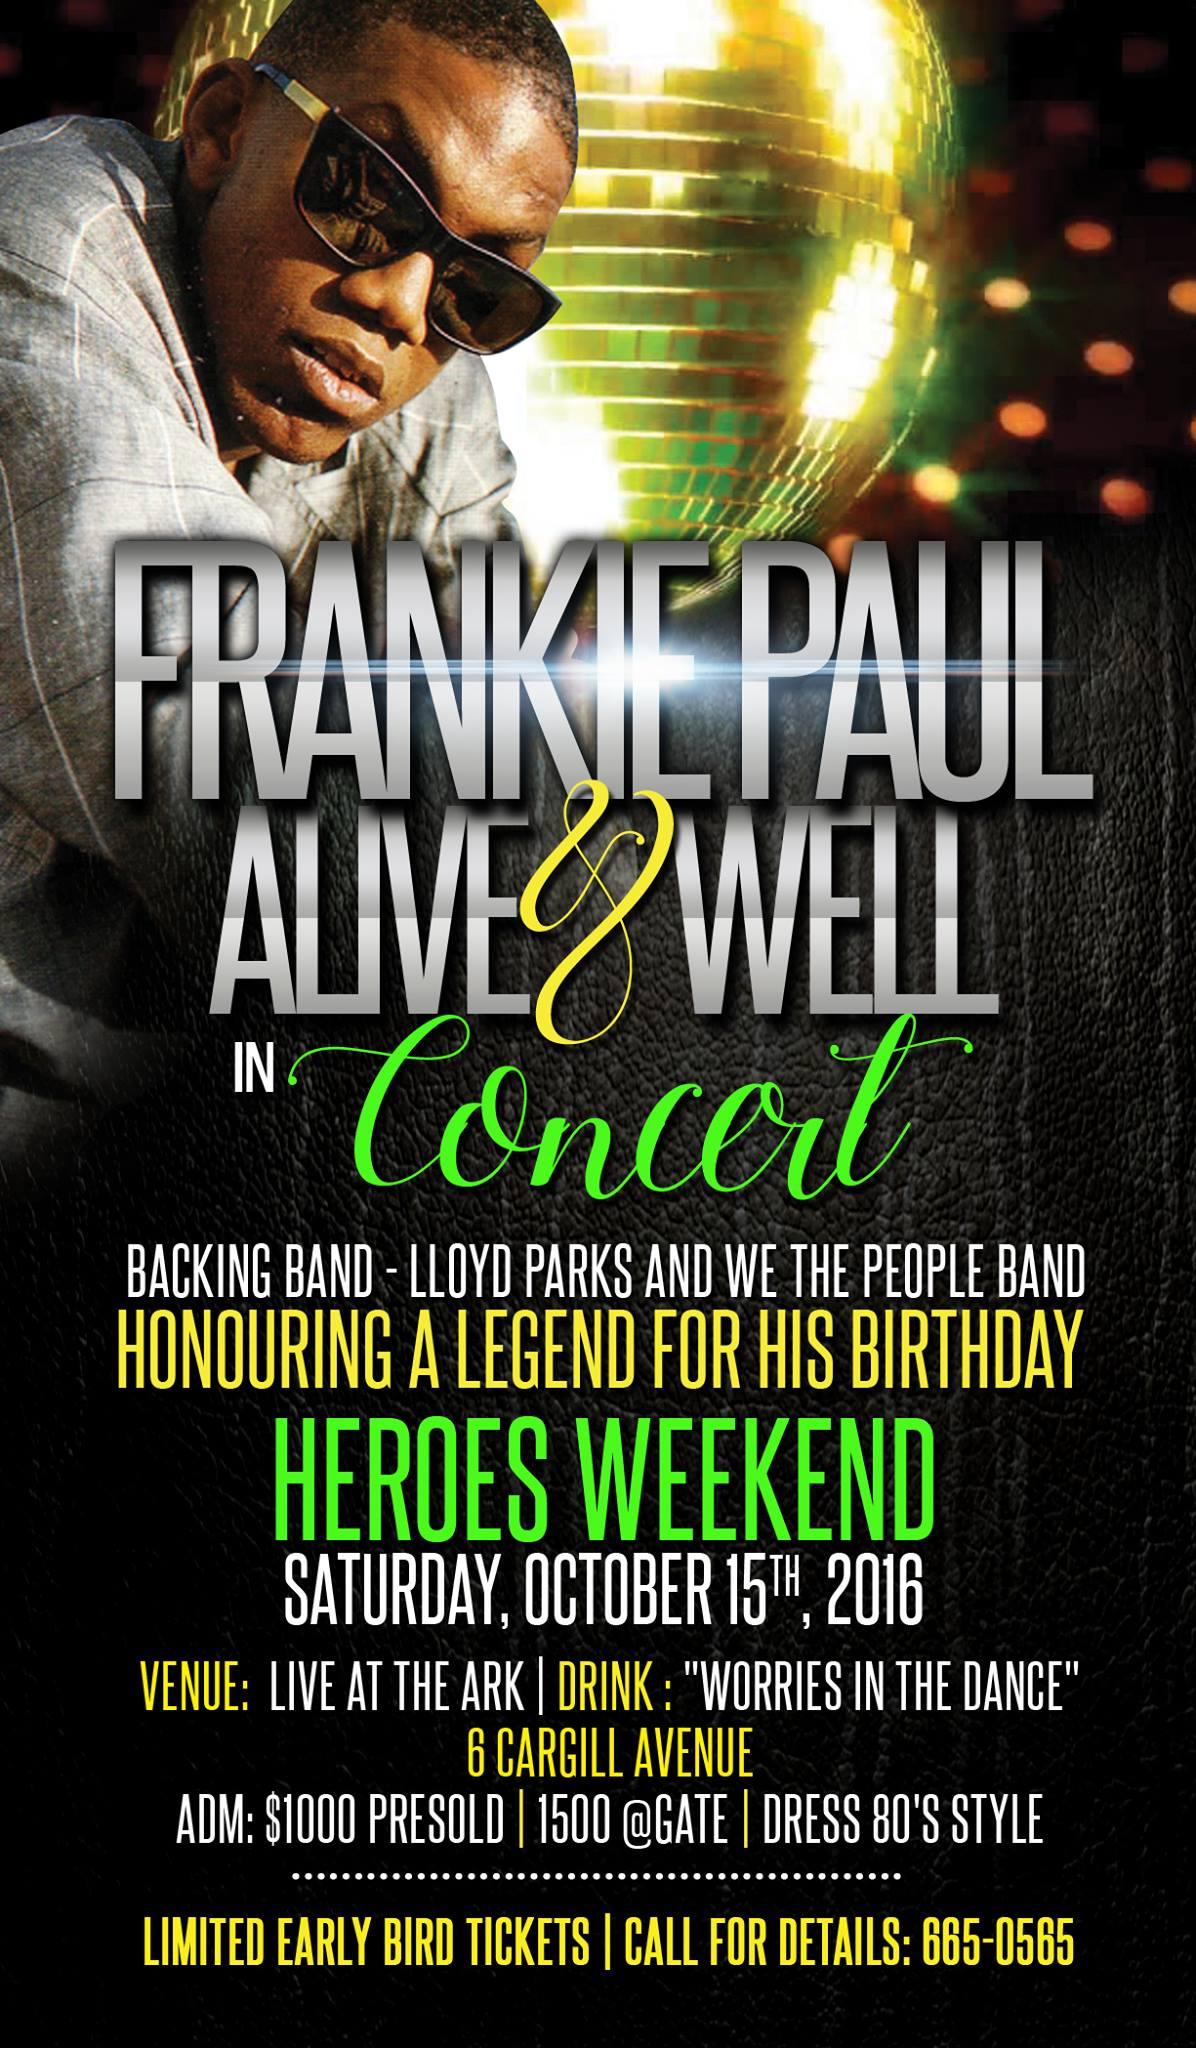 Frankie Paul - Alive & Well in Concert